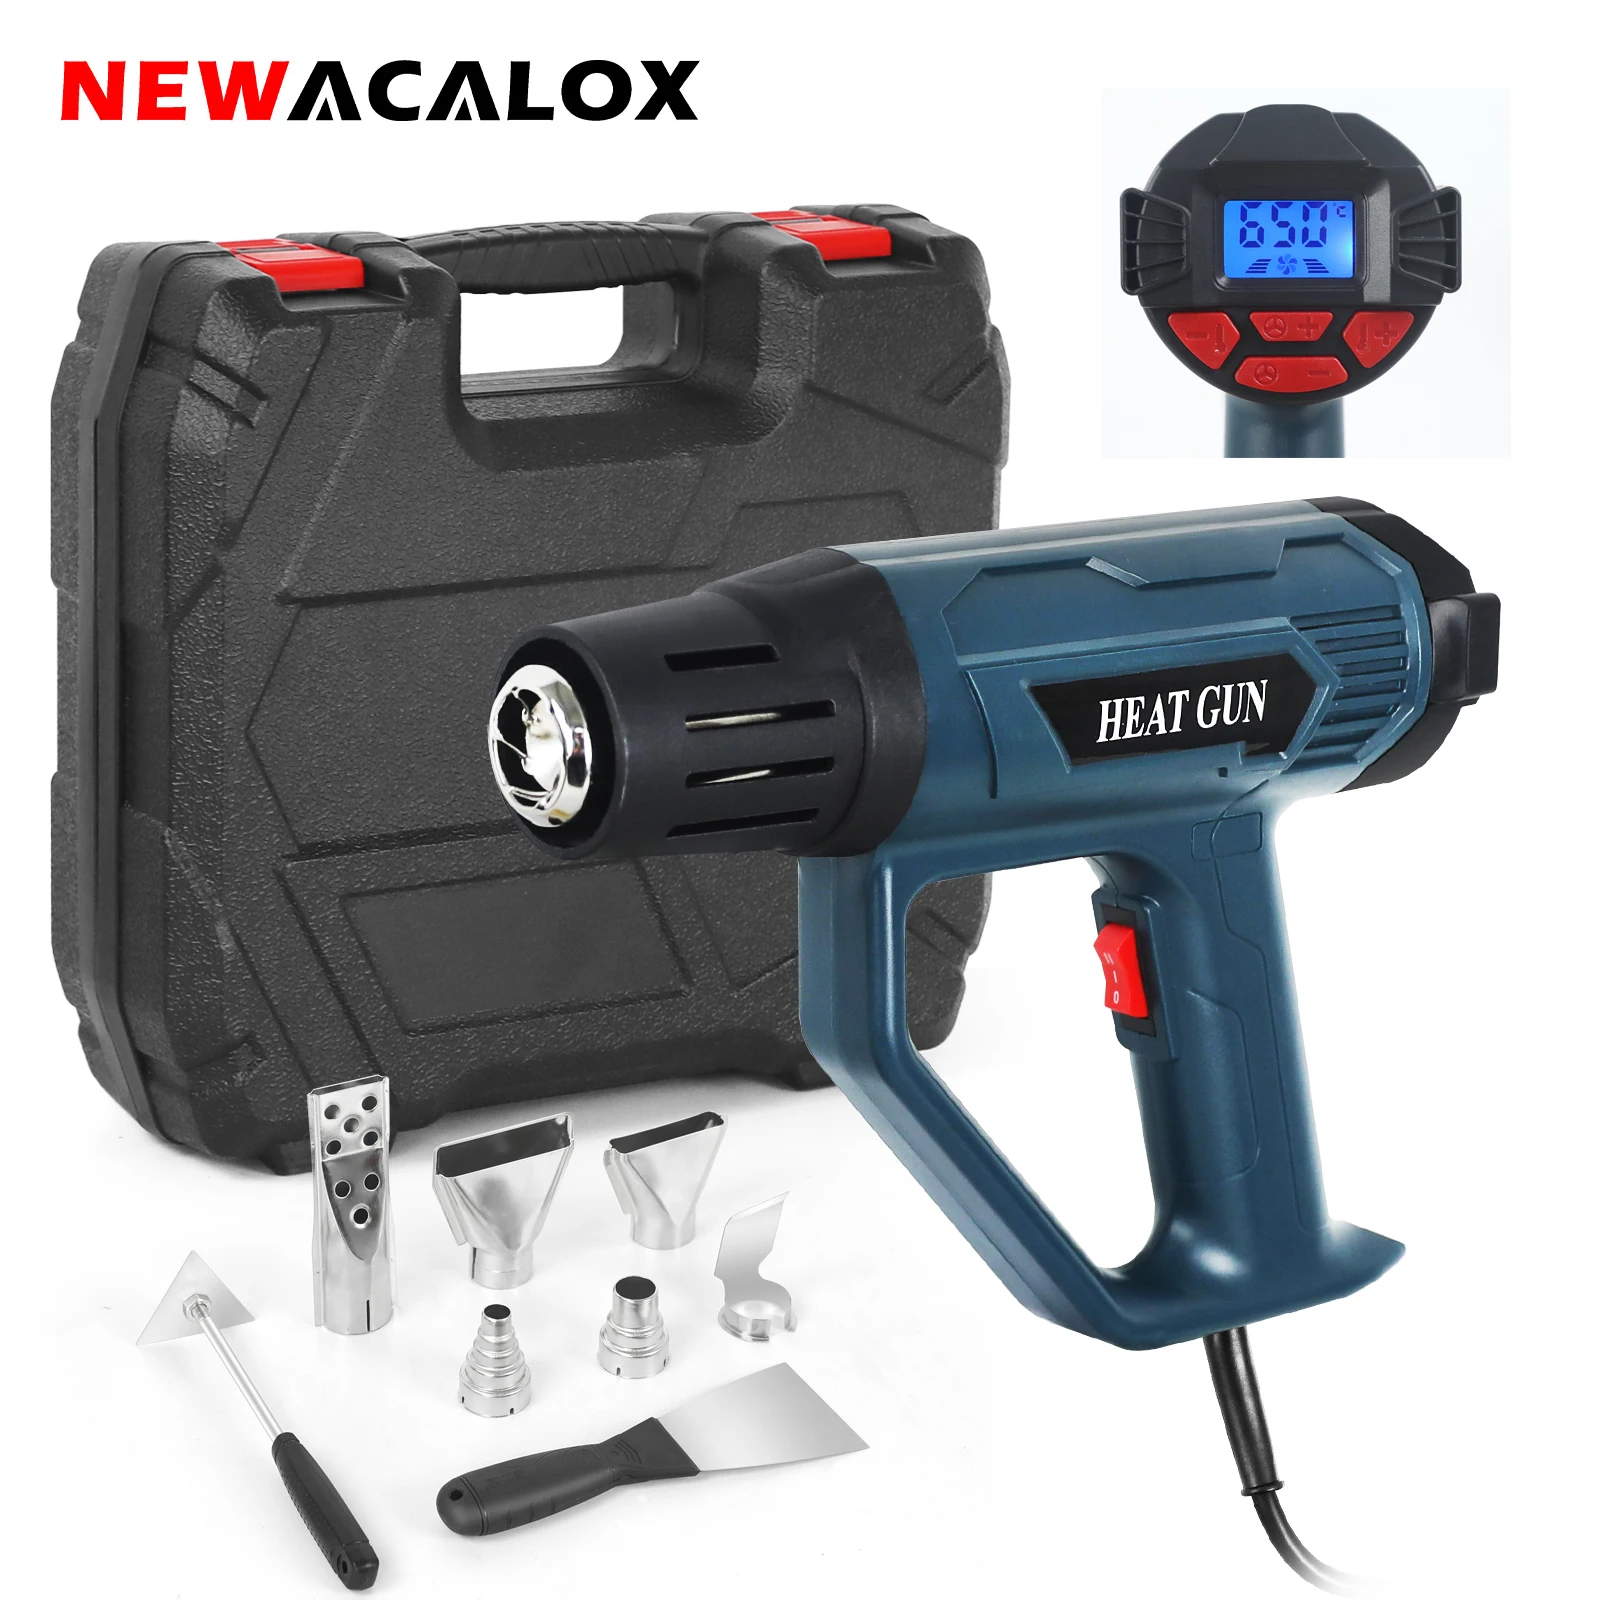 NEWACALOX 1500-2000W Industrial Hair Dryer Heat Gun Adjustable Wind Speed Hot Air Gun 50℃-650℃ Temperature Shrink Wrapping Tools newacalox magnetic soldering third hand large iron plate base heat gun holder pcb clip 3x led magnifier soldering work station